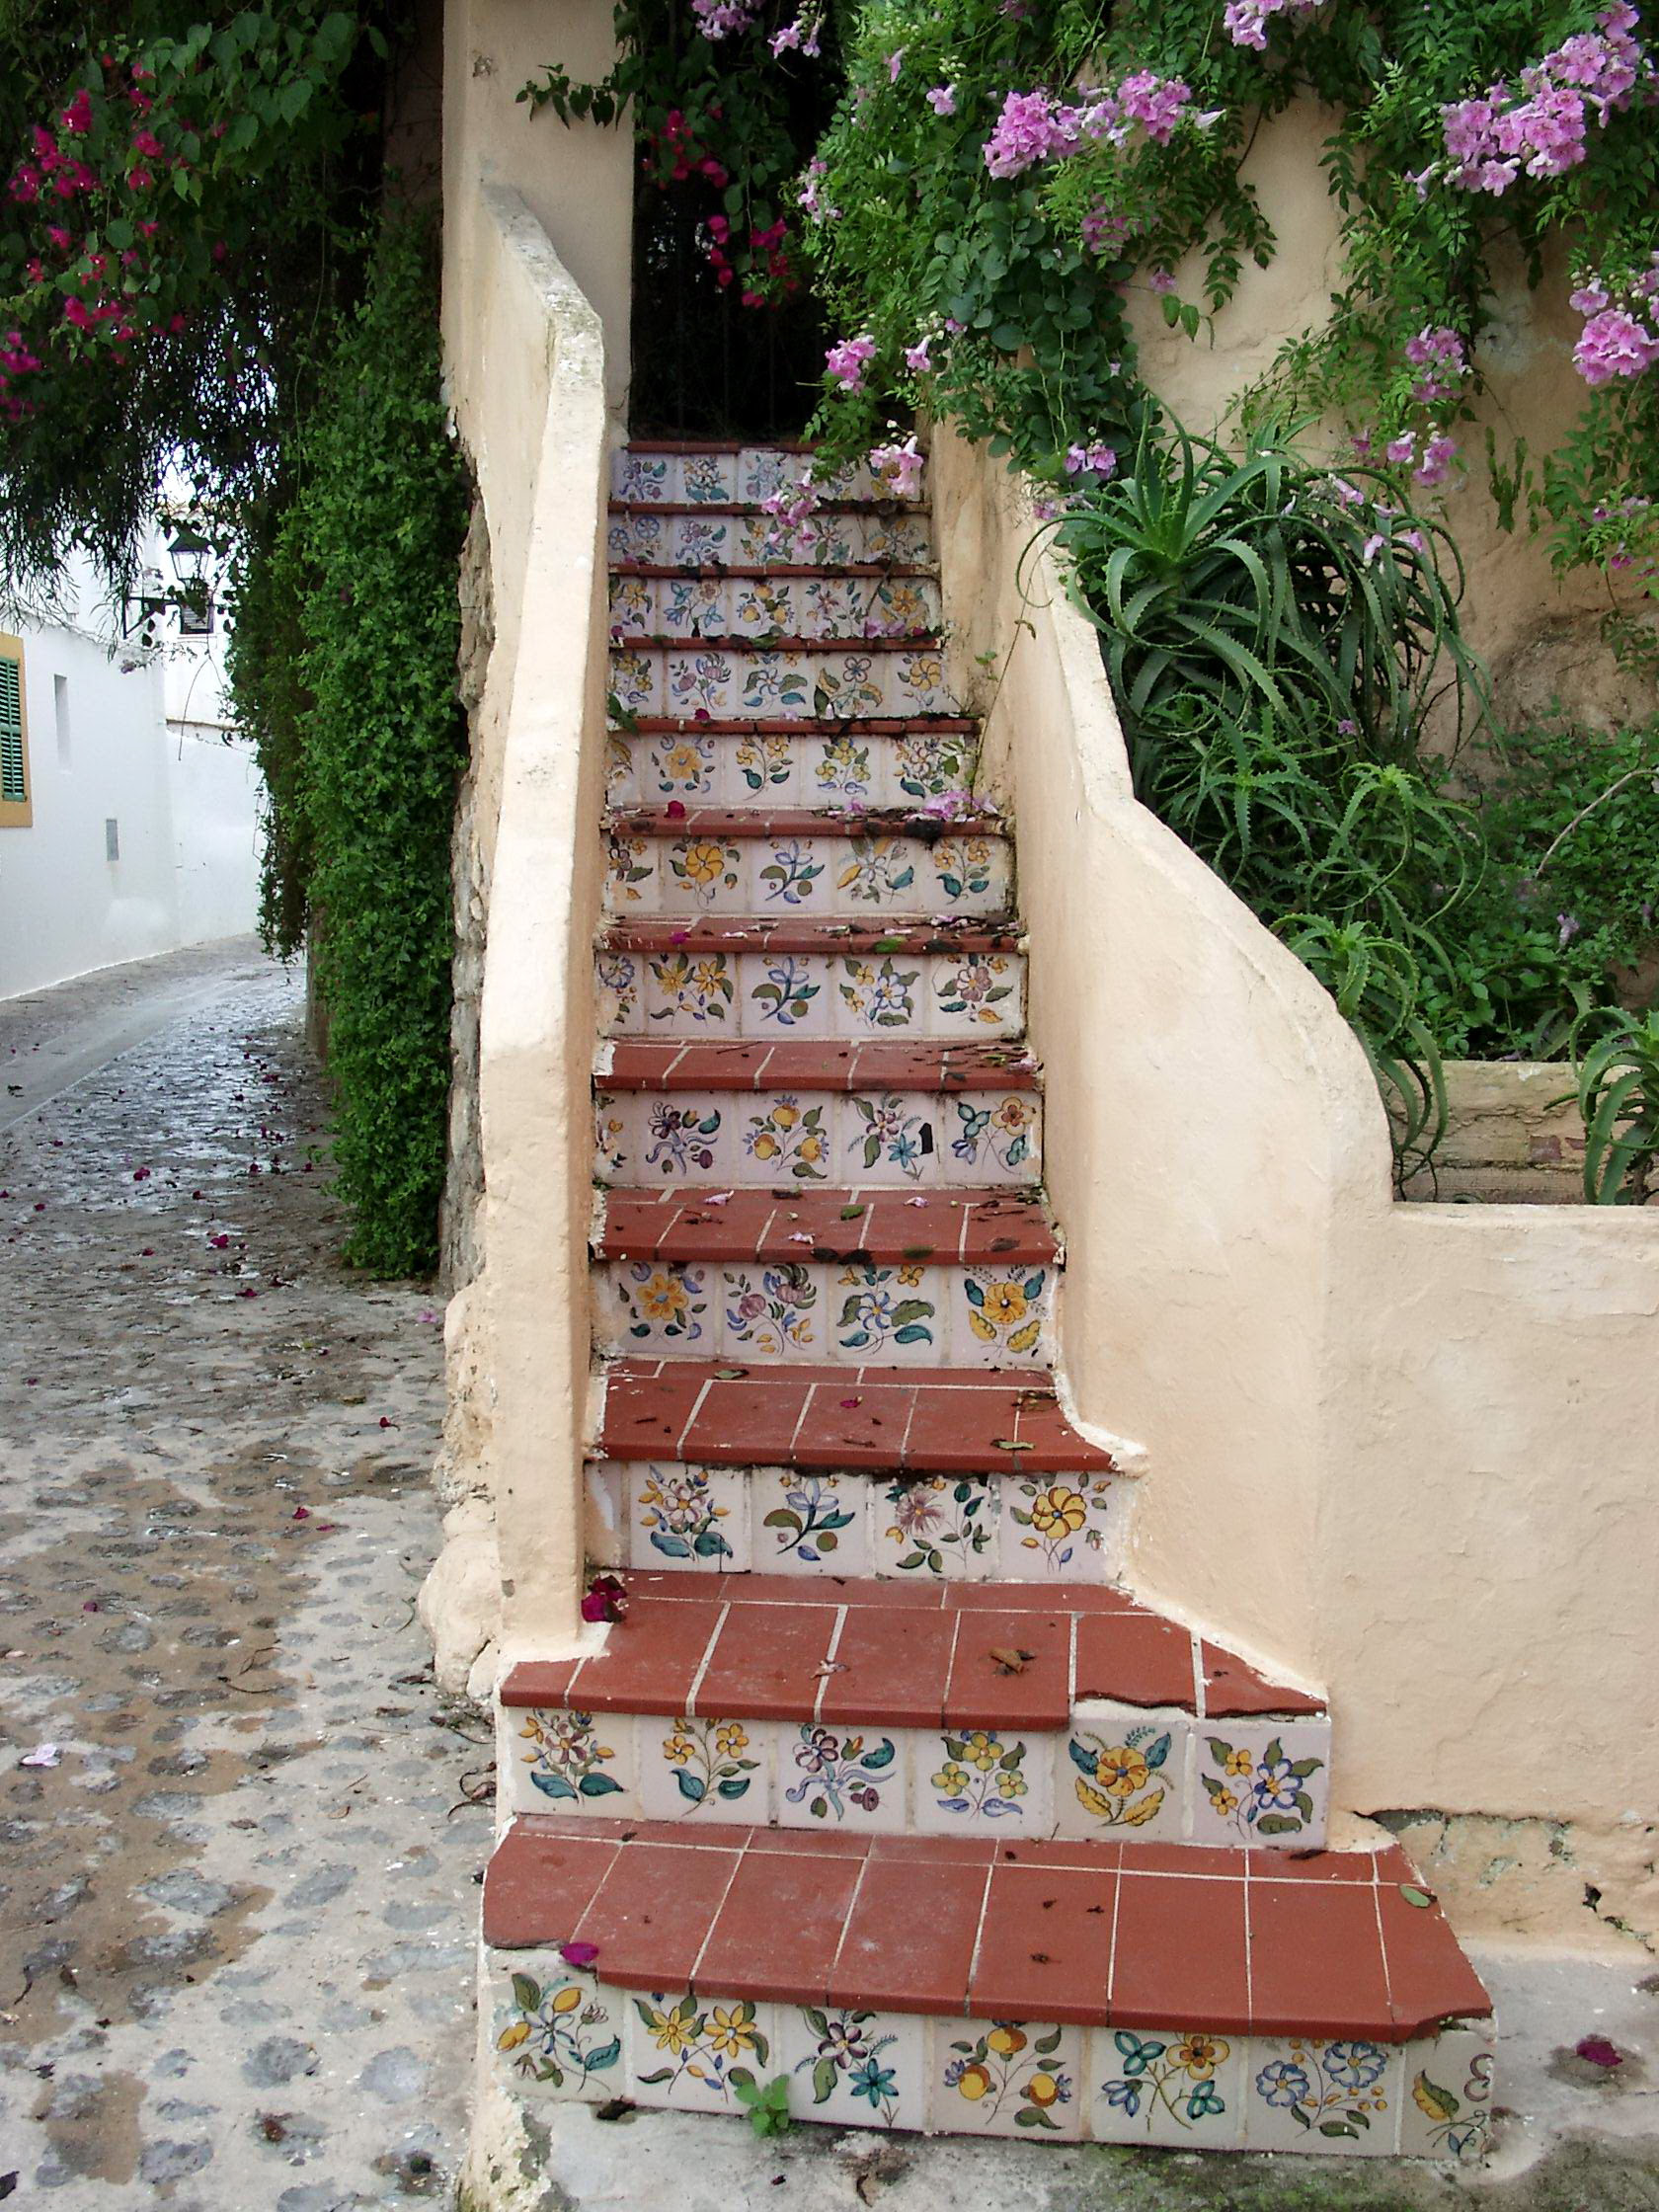 http://upload.wikimedia.org/wikipedia/commons/a/a1/Staircase_in_Eivissa.JPG